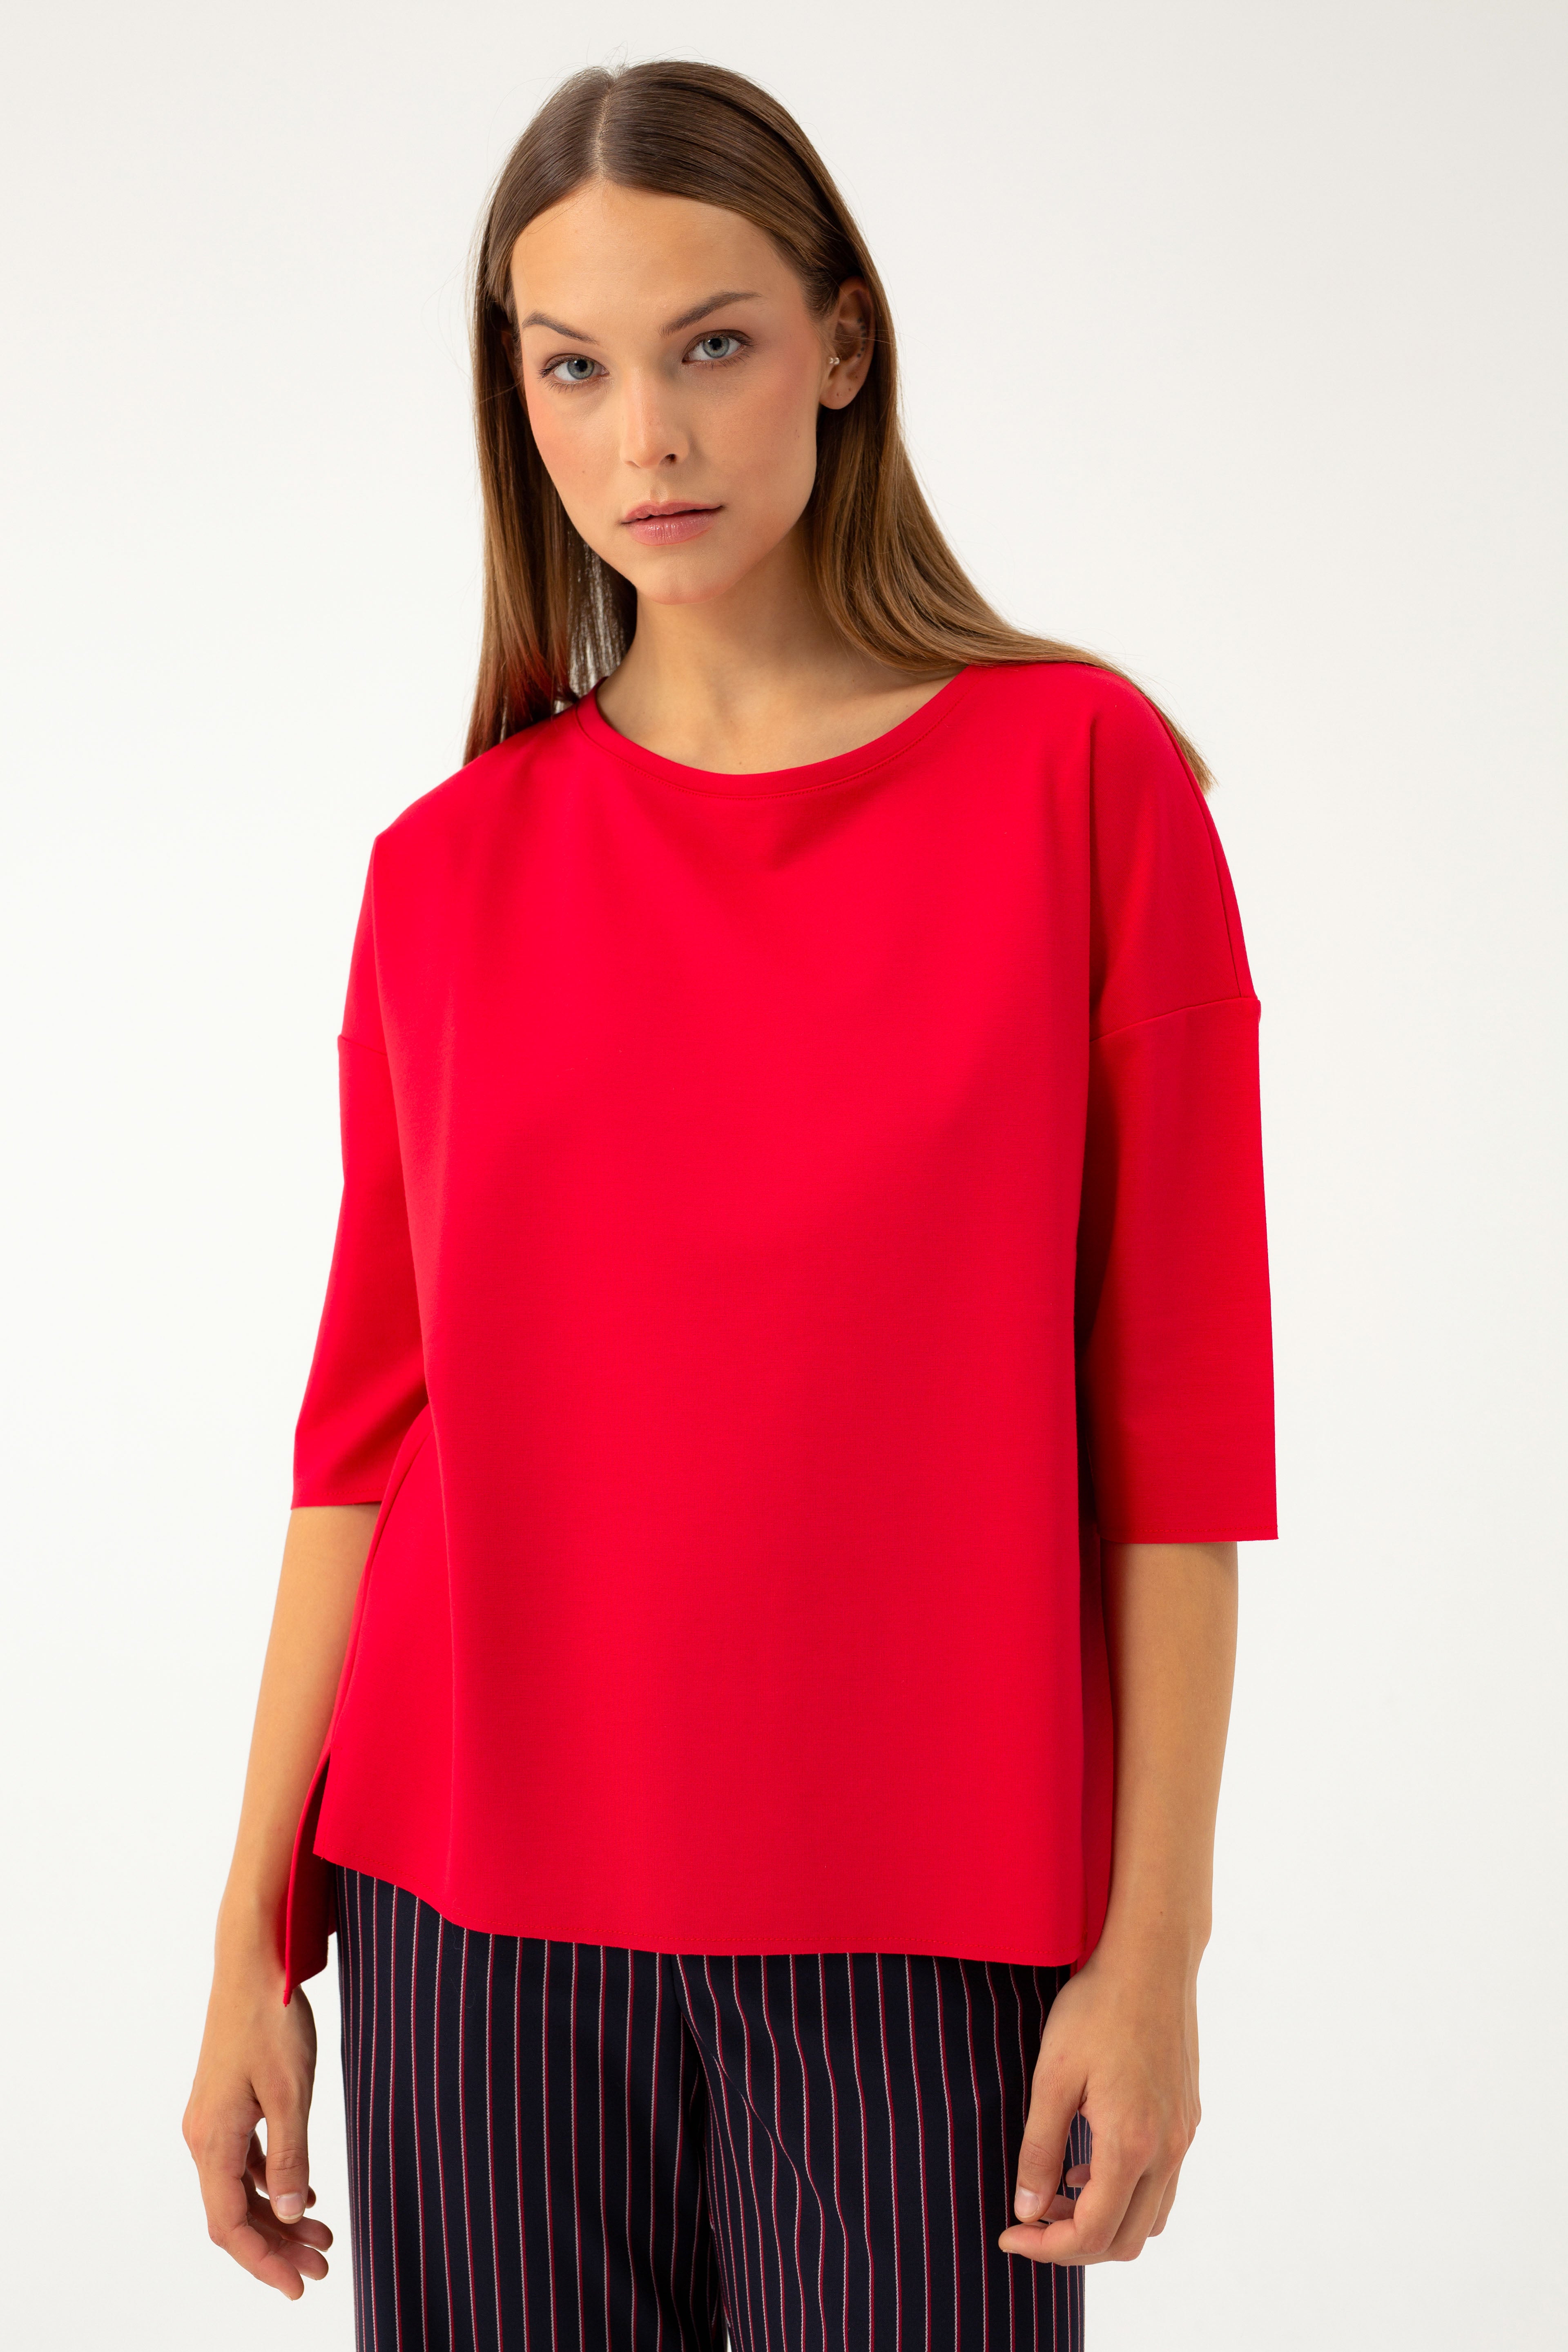 RED 3/4 SLEEVES BLOUSE